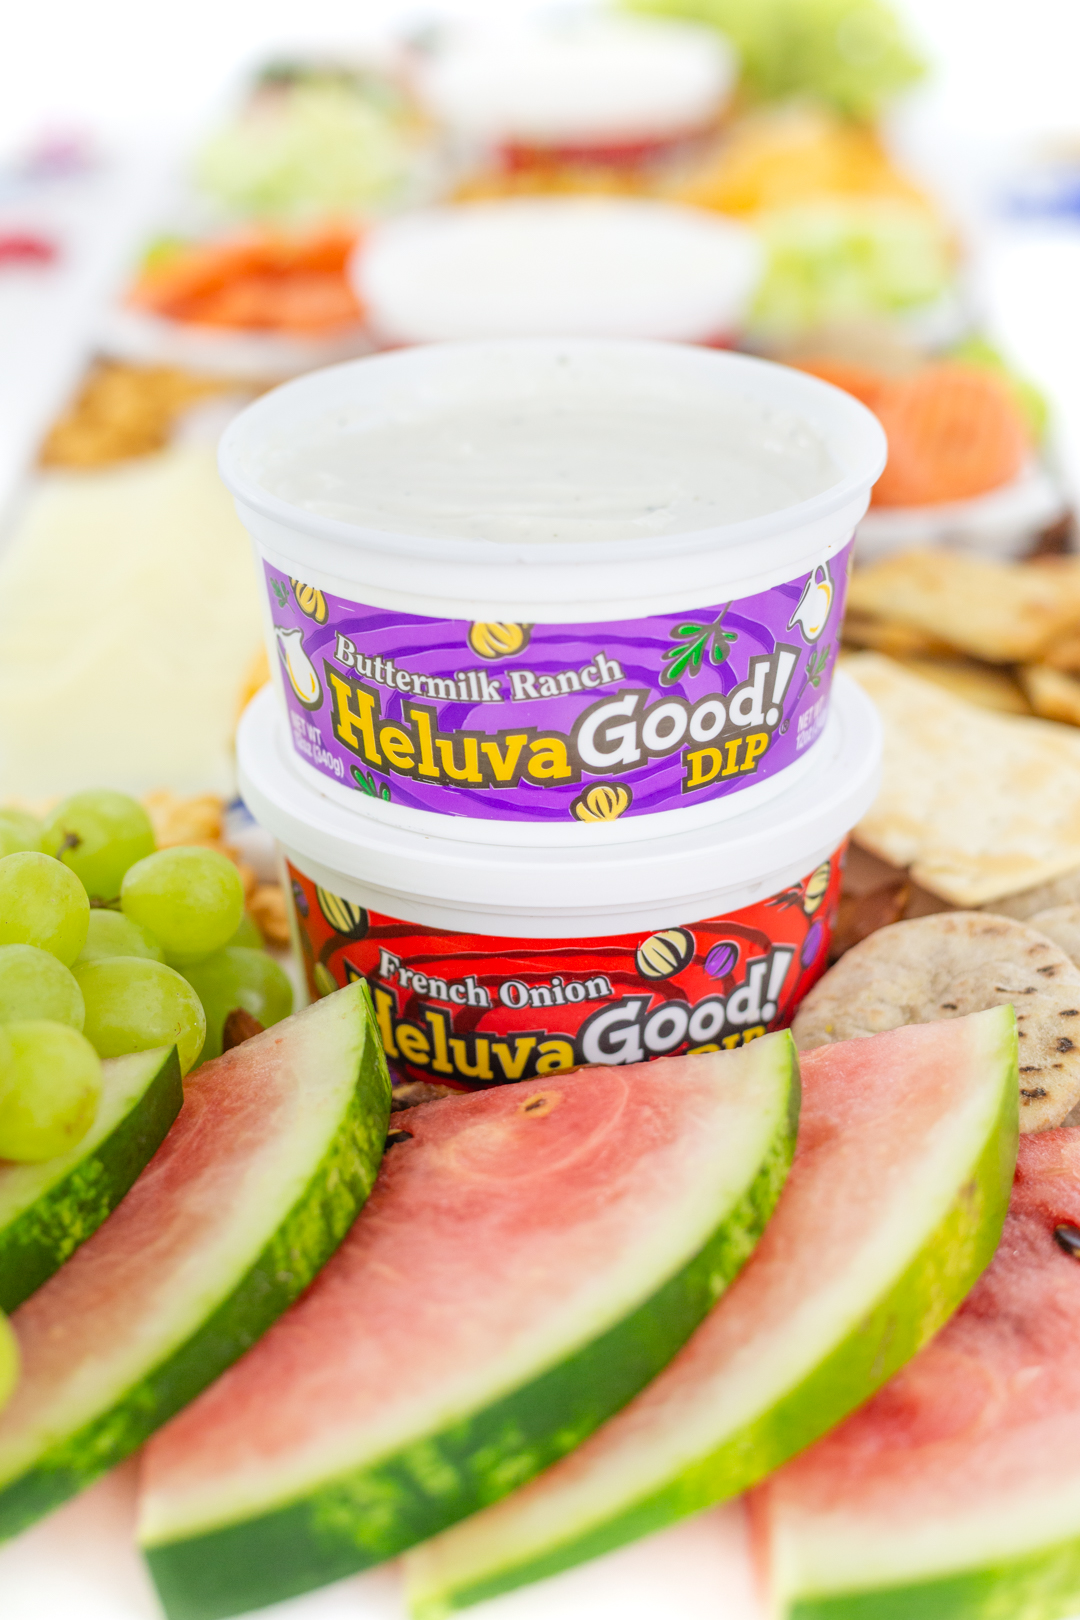 Heluva Good! Dip Buttermilk Ranch and French Onion